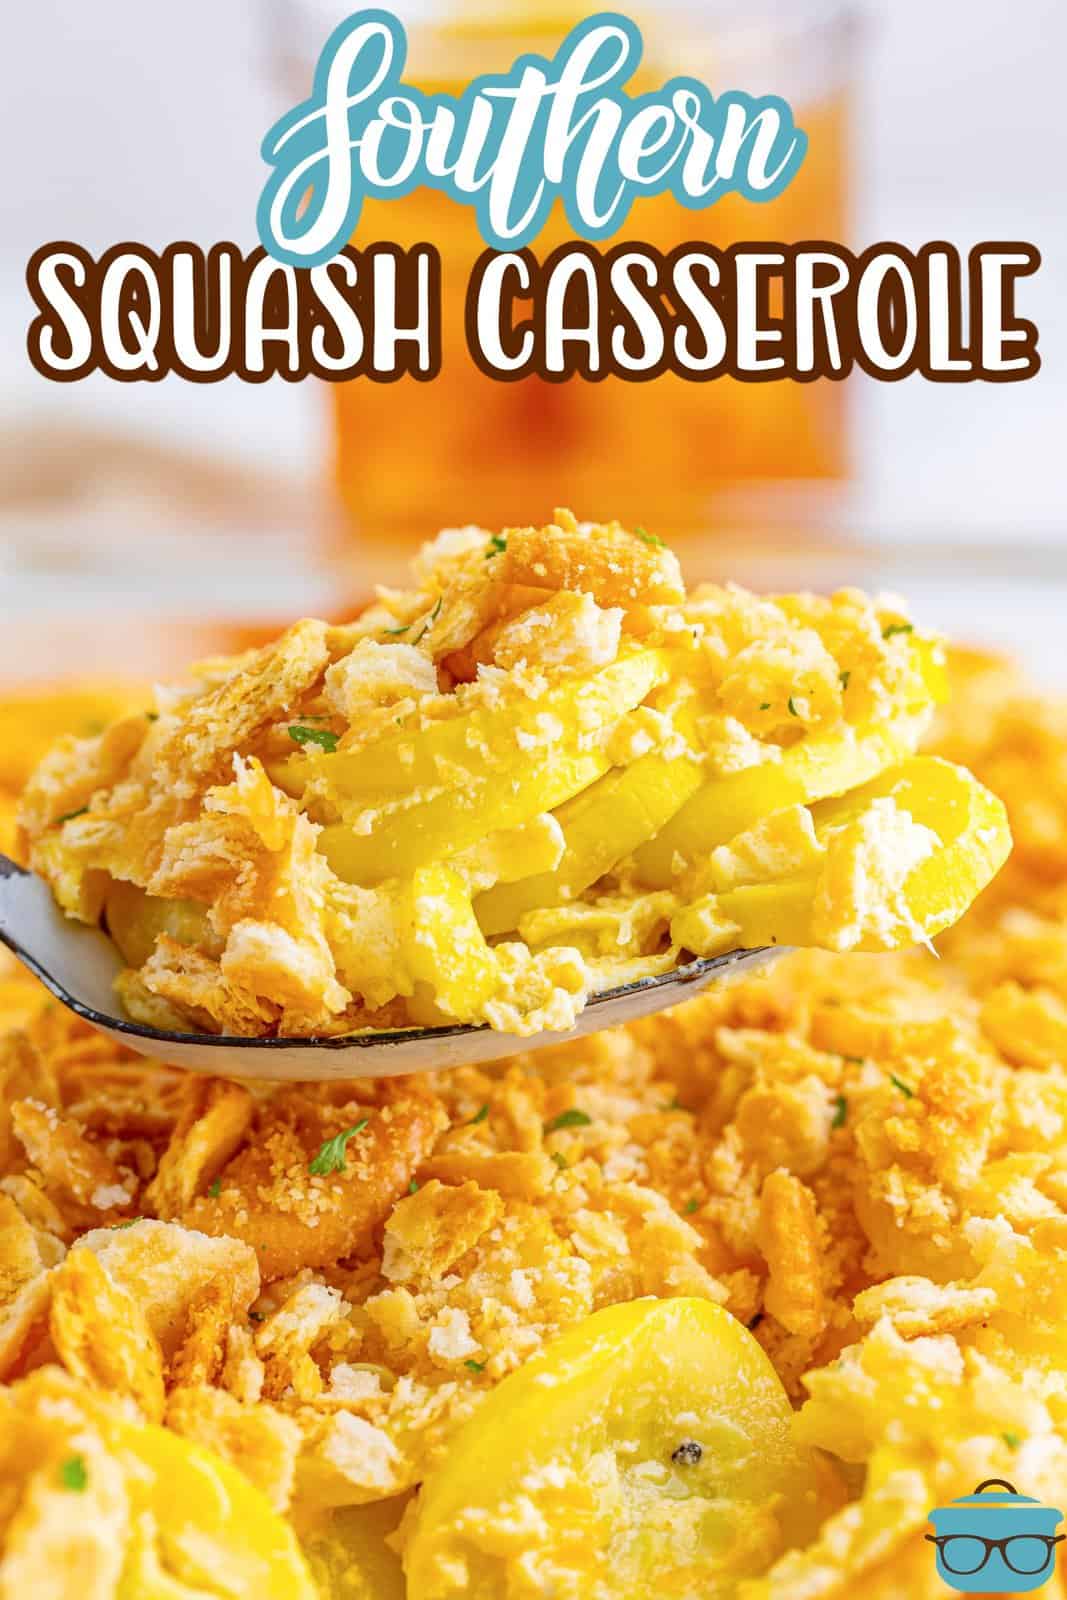 A spoon with a bite of squash casserole.